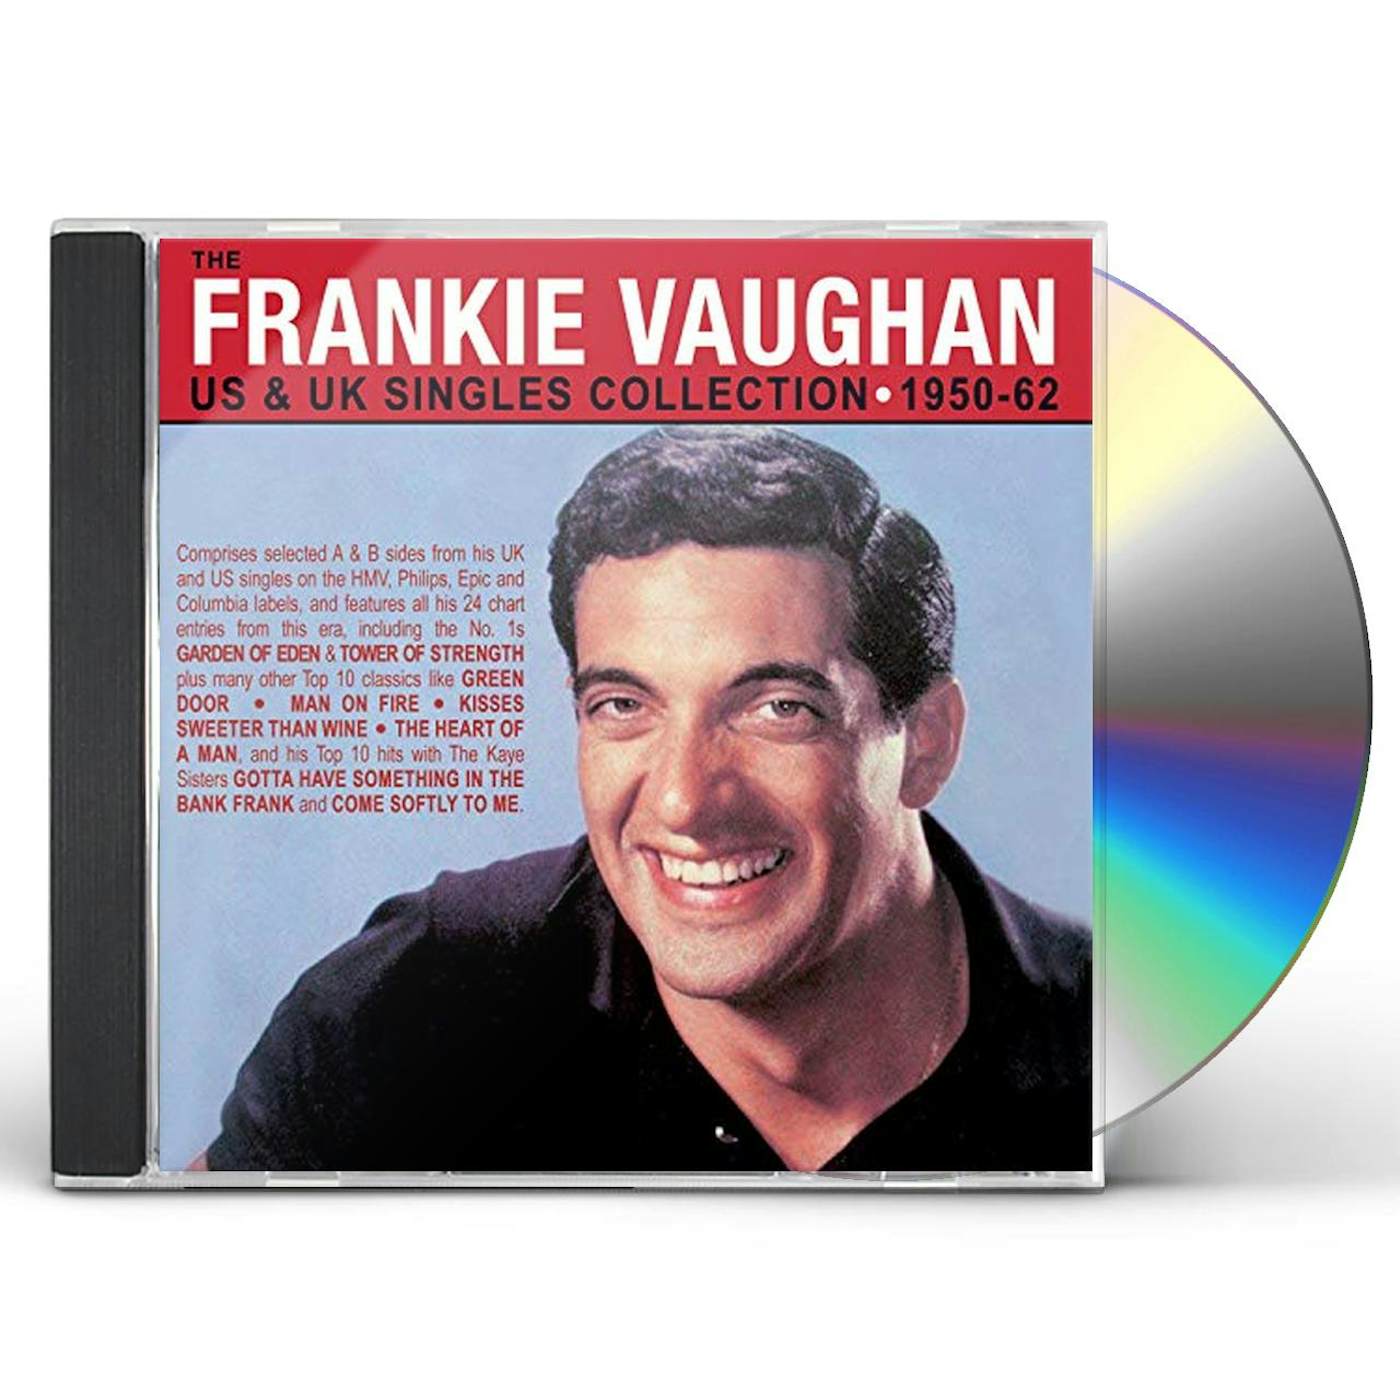 Frankie Vaughan US & UK SINGLES COLLECTION 1950-62 CD